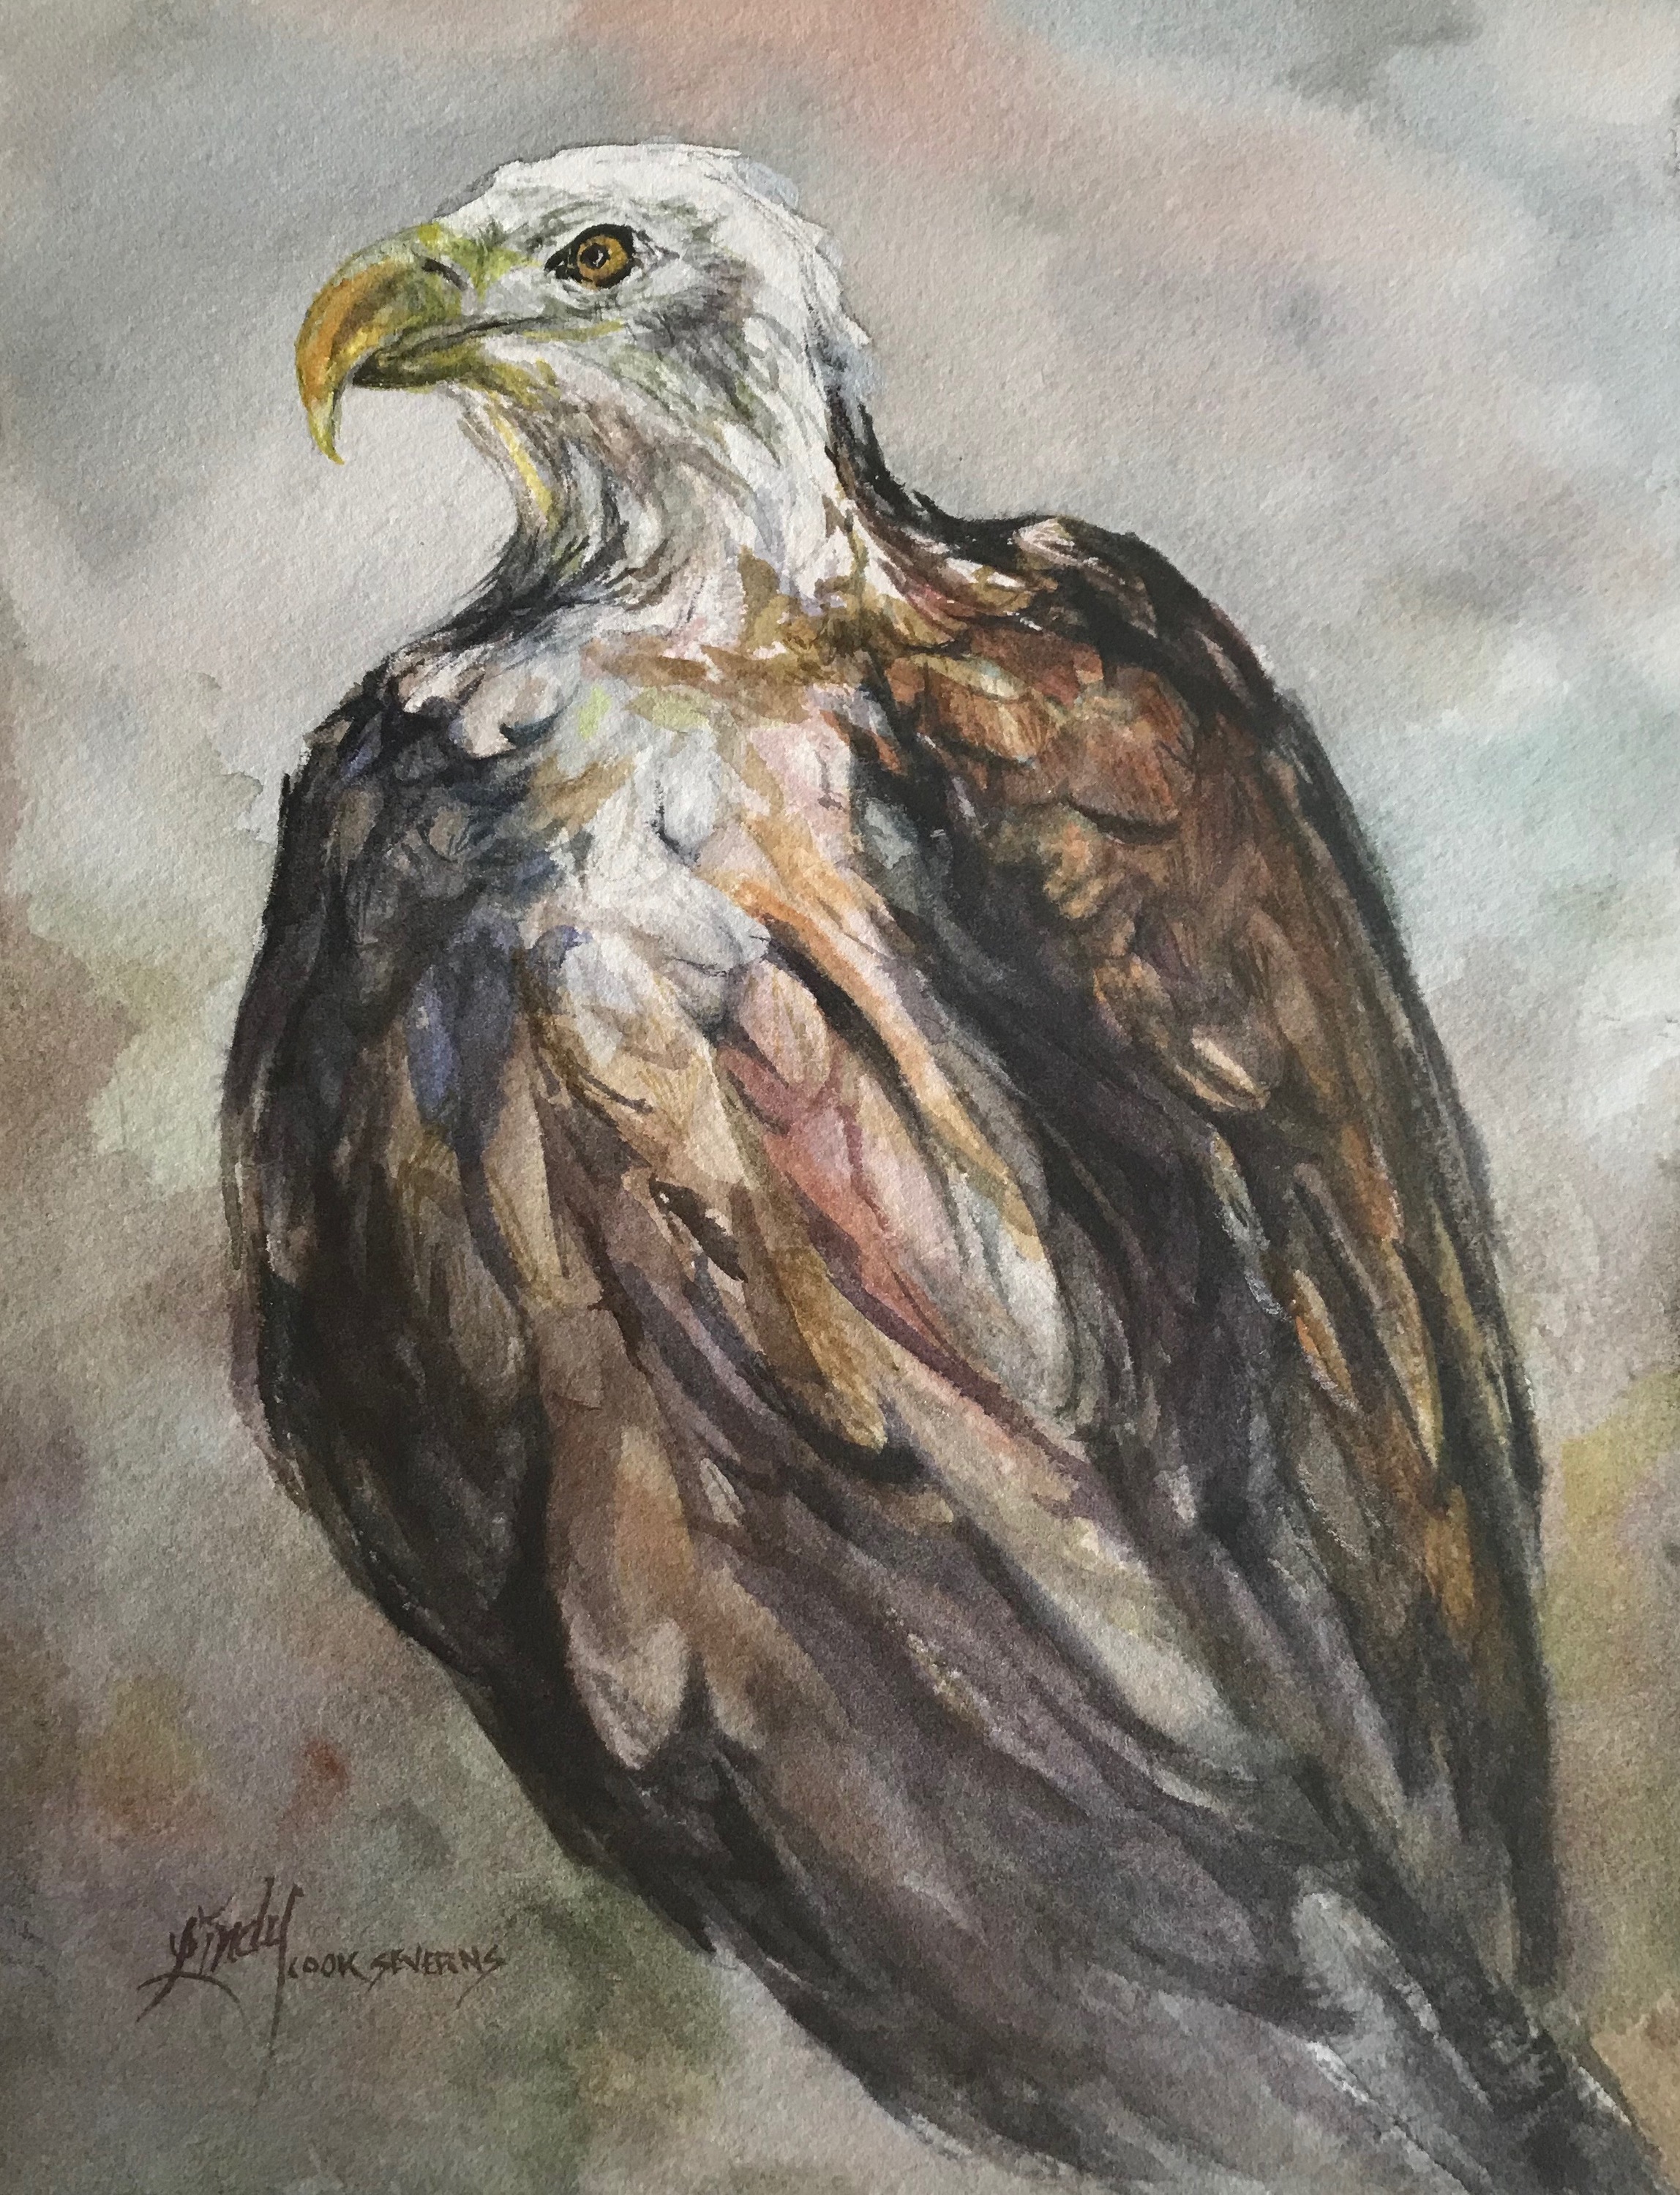 Ruffled with pride 8x10 watercolor lindy cook severns xyyhwf